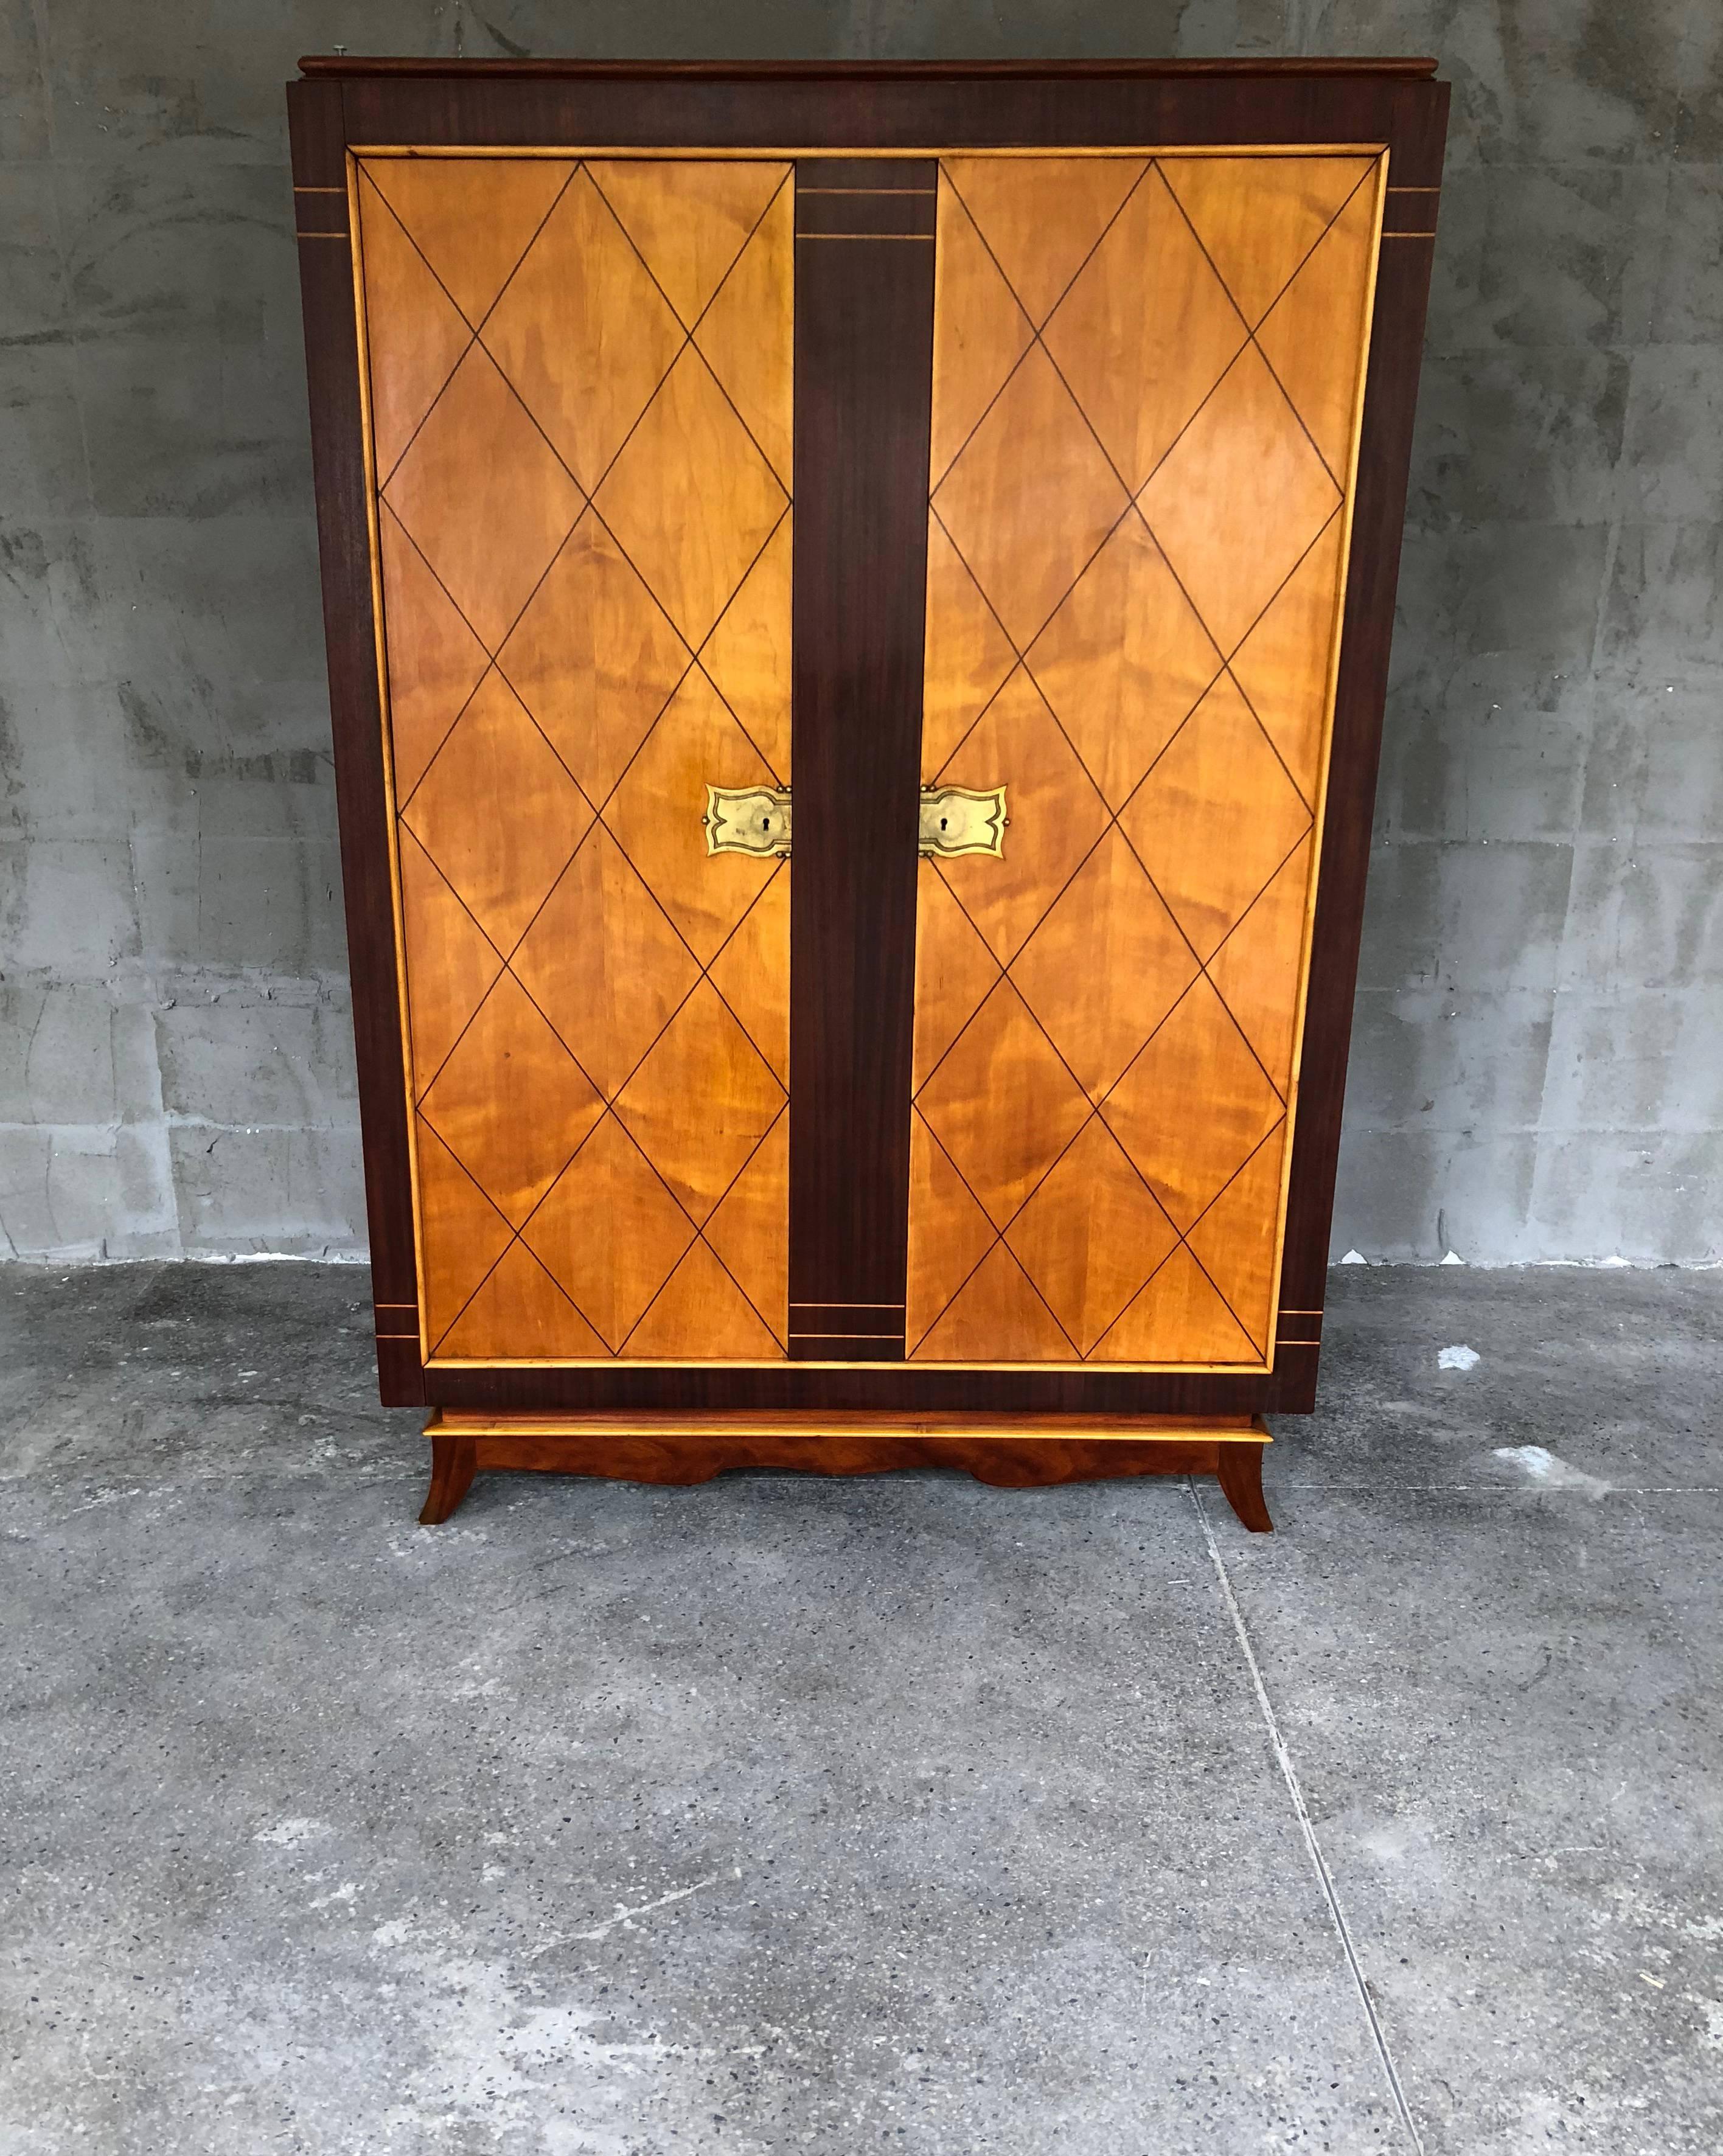 Very elegant and stylish French Art Deco armoire in the style of Jean Pascaud or Jean Desnos but not signed. Entirely refinished and delicately varnished. Unfortunately lost his original key.